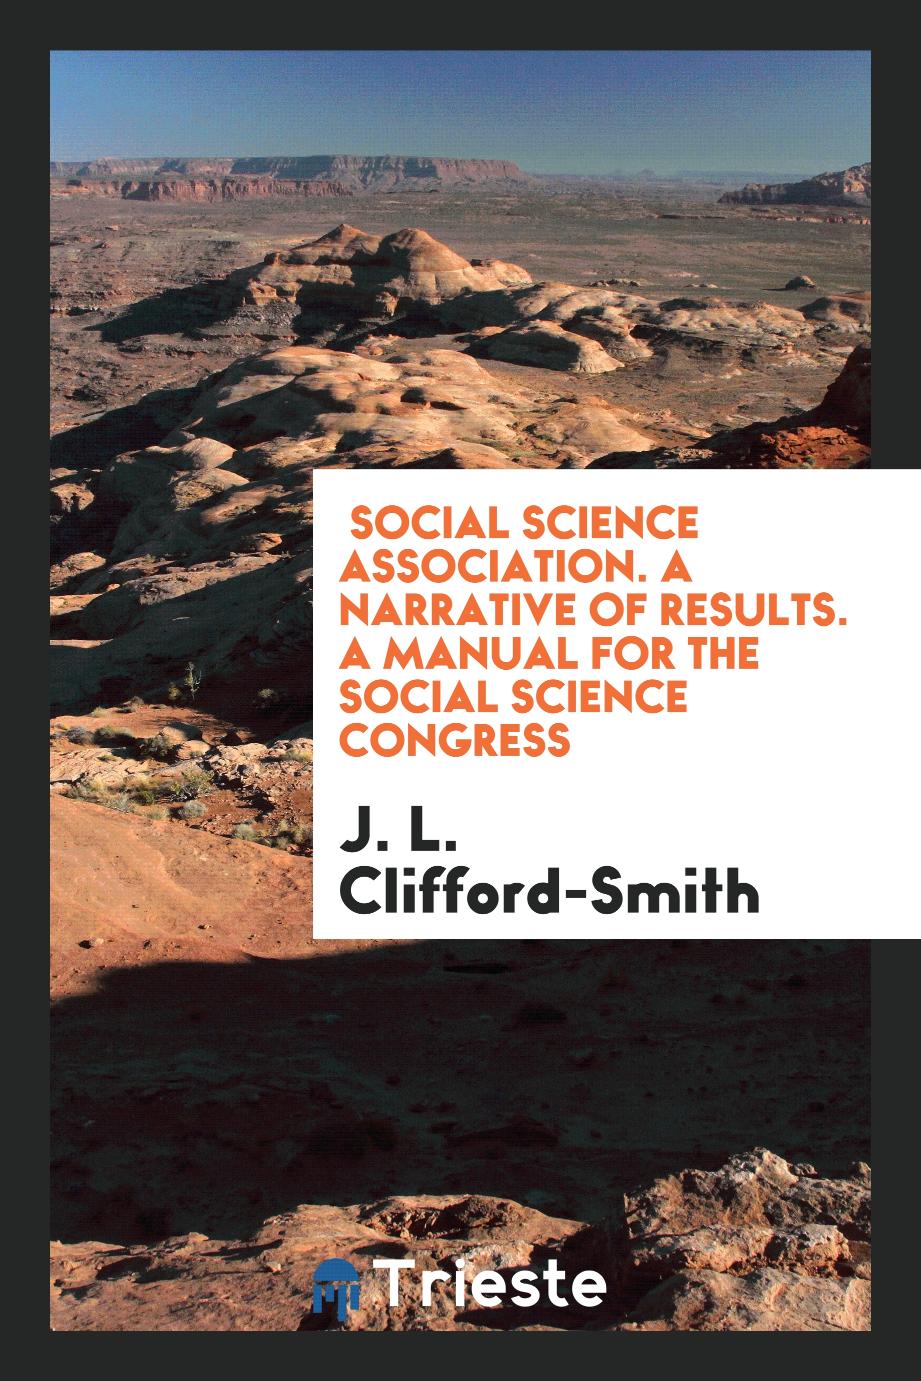 Social Science Association. A Narrative of Results. A Manual for the Social Science Congress